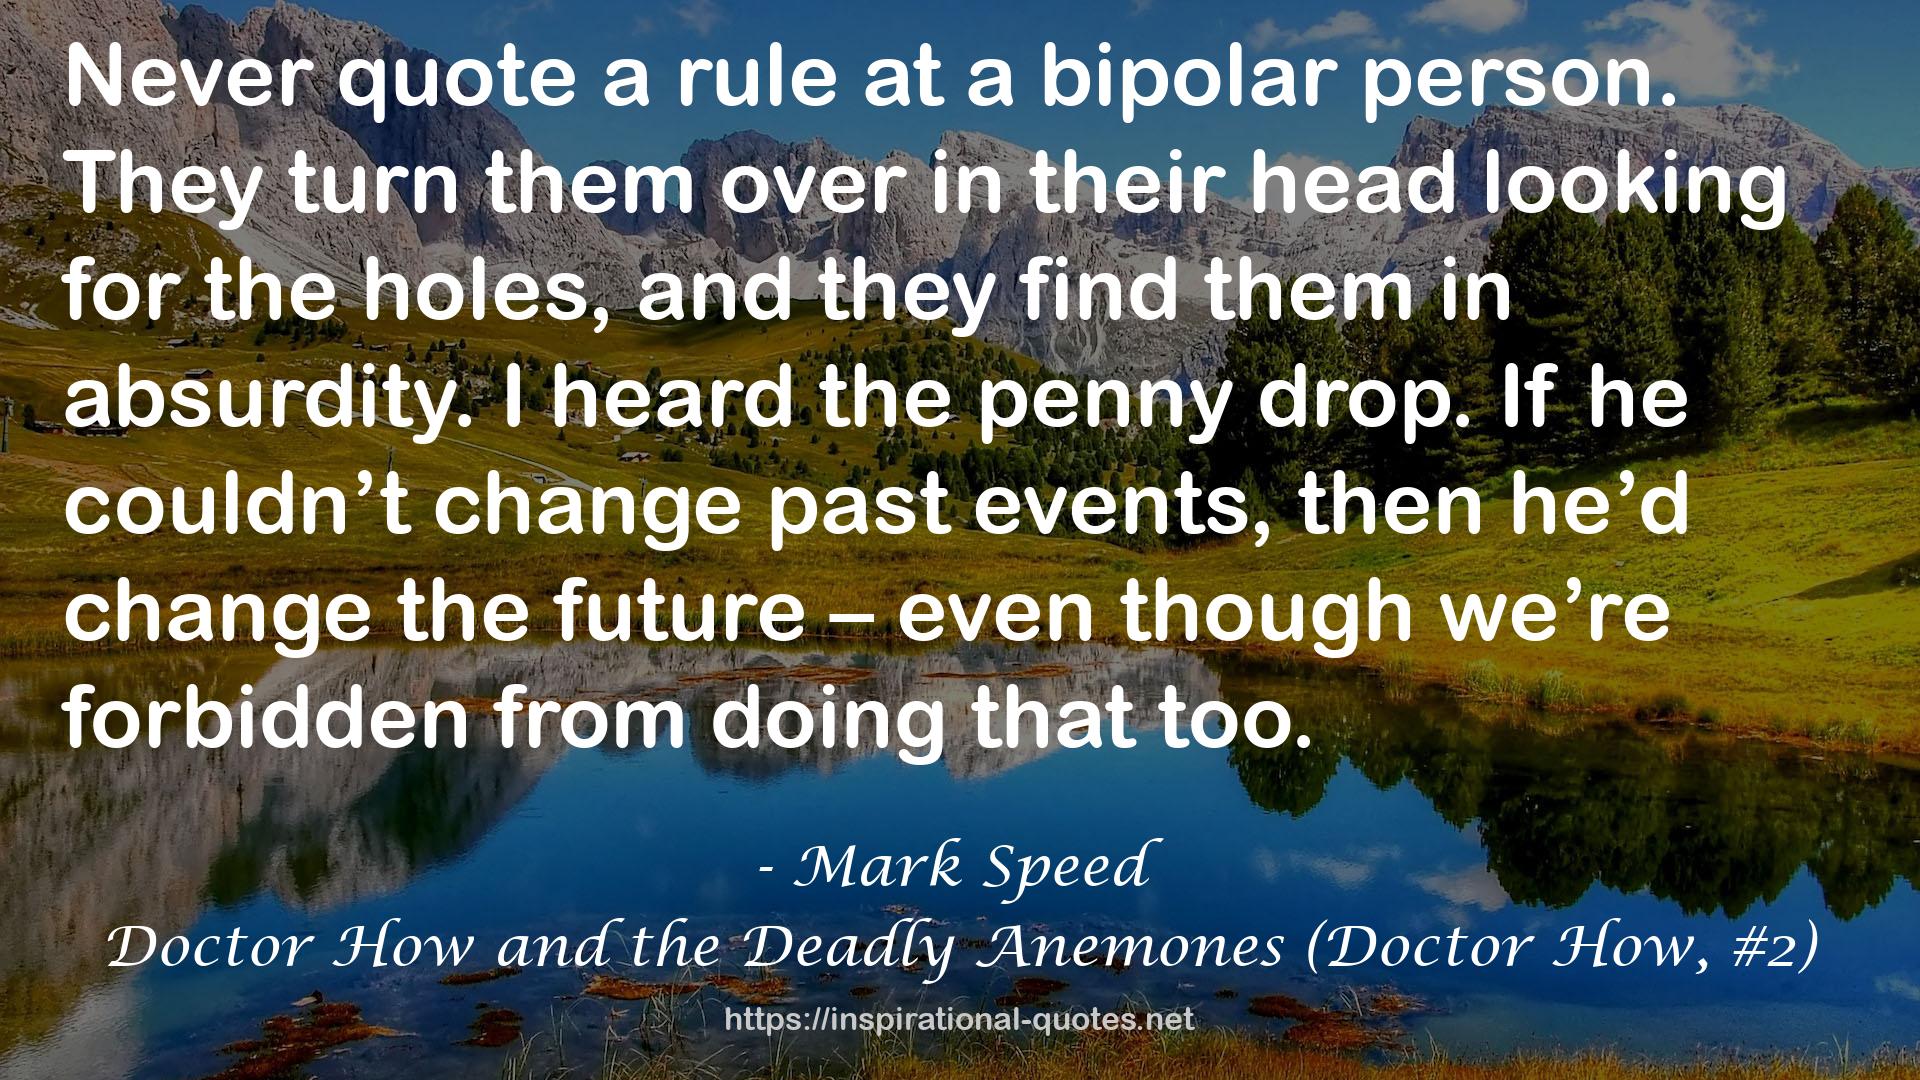 Doctor How and the Deadly Anemones (Doctor How, #2) QUOTES